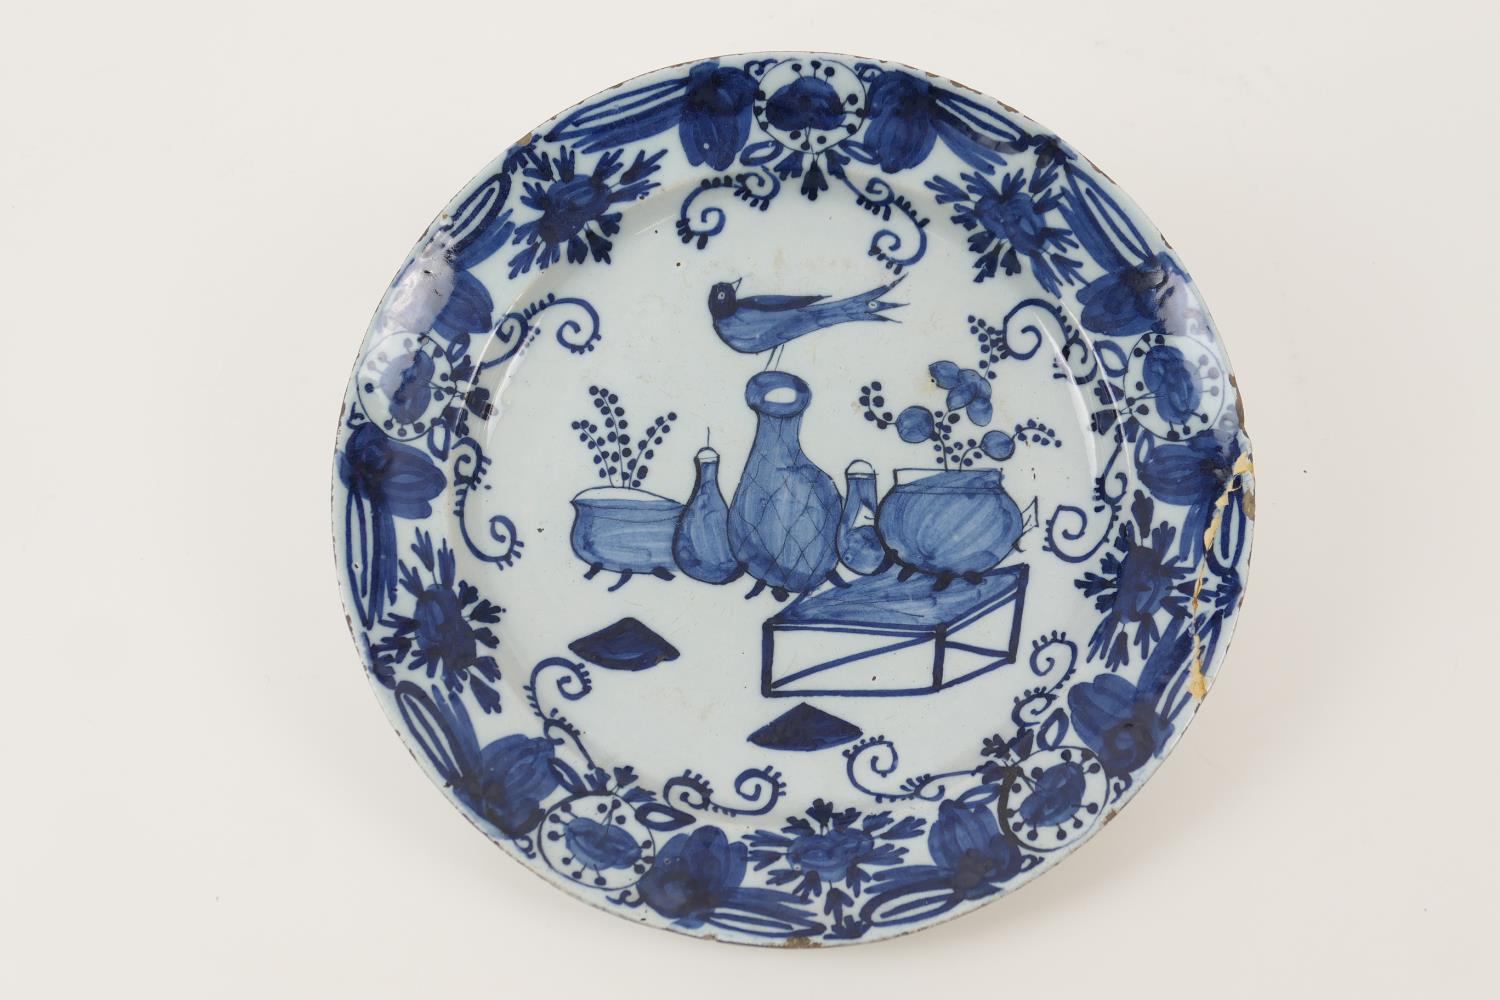 Delft blue and white dish, circa 1740-60, centred with a bird standing atop a vase in chinoiserie